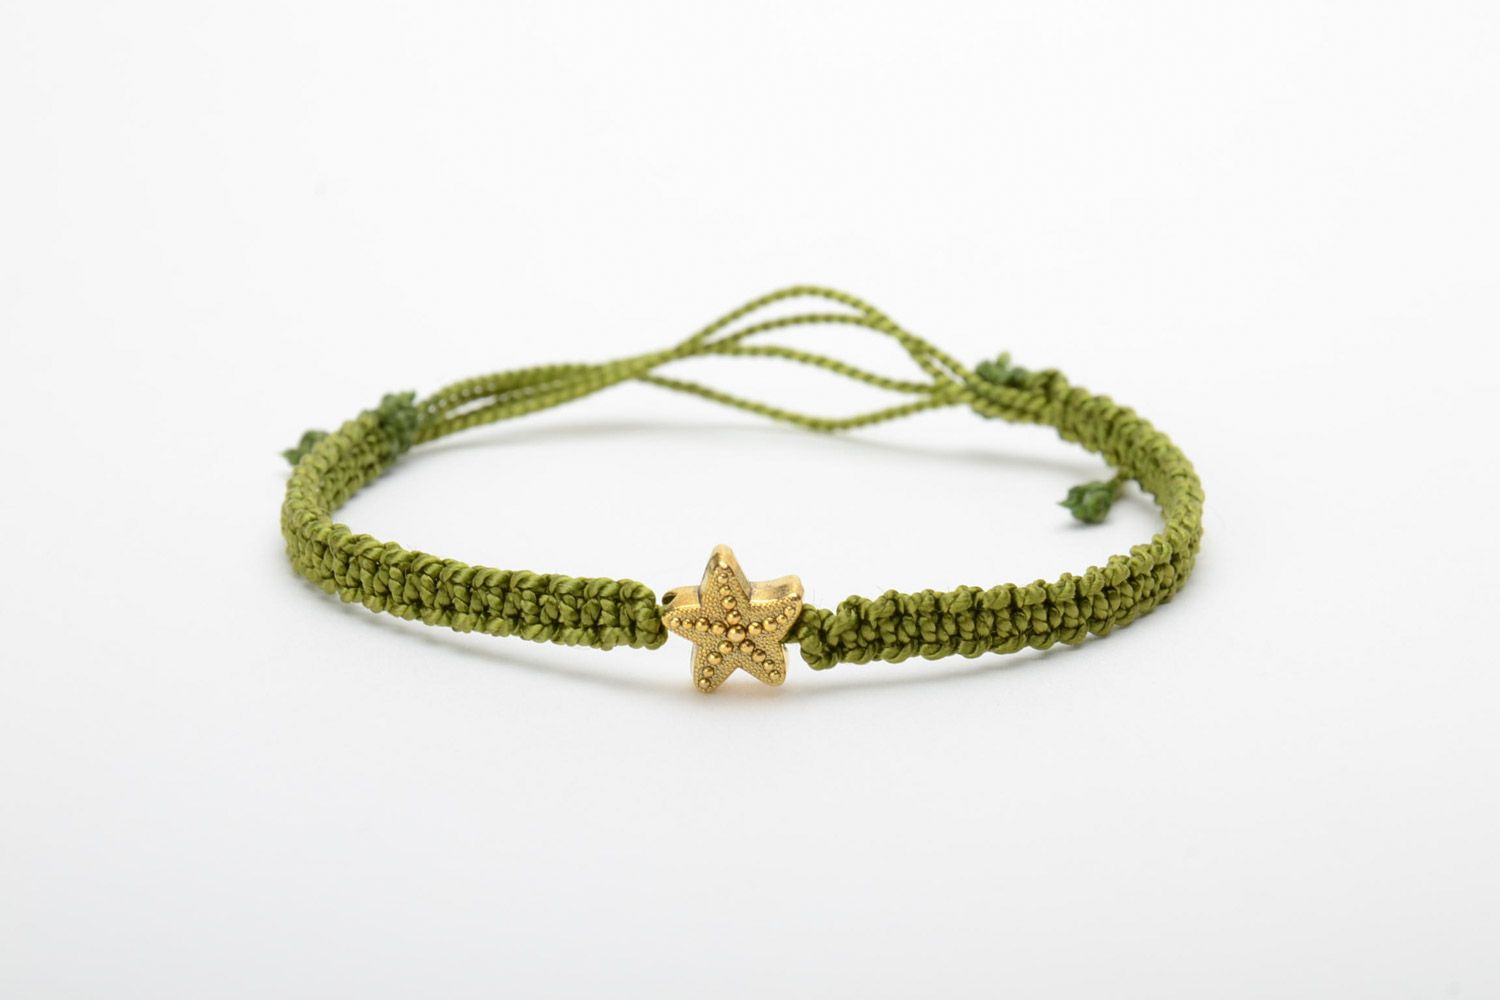 Handmade women's macrame woven bracelet of green color with charm in the shape of star photo 5